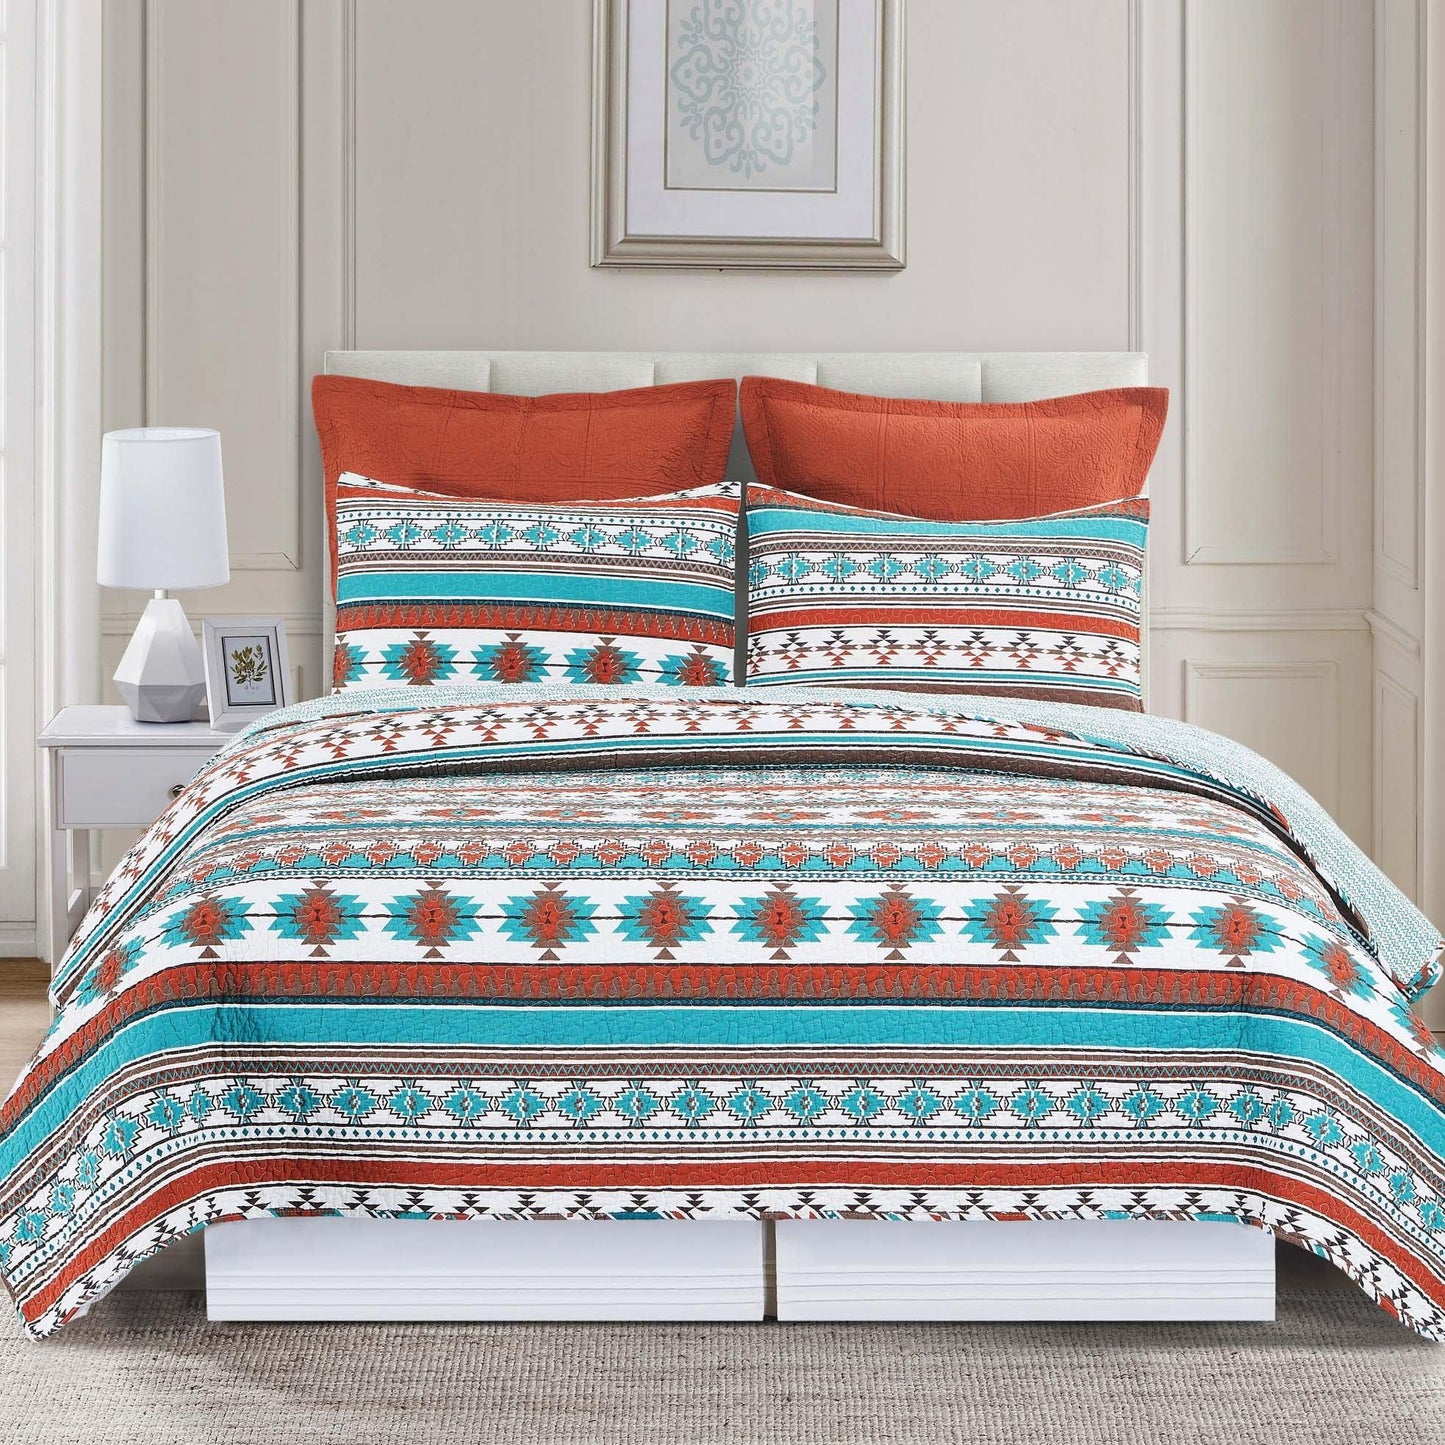 Wildest Dreams Quilt Bedding Set (King) - Wild Wings